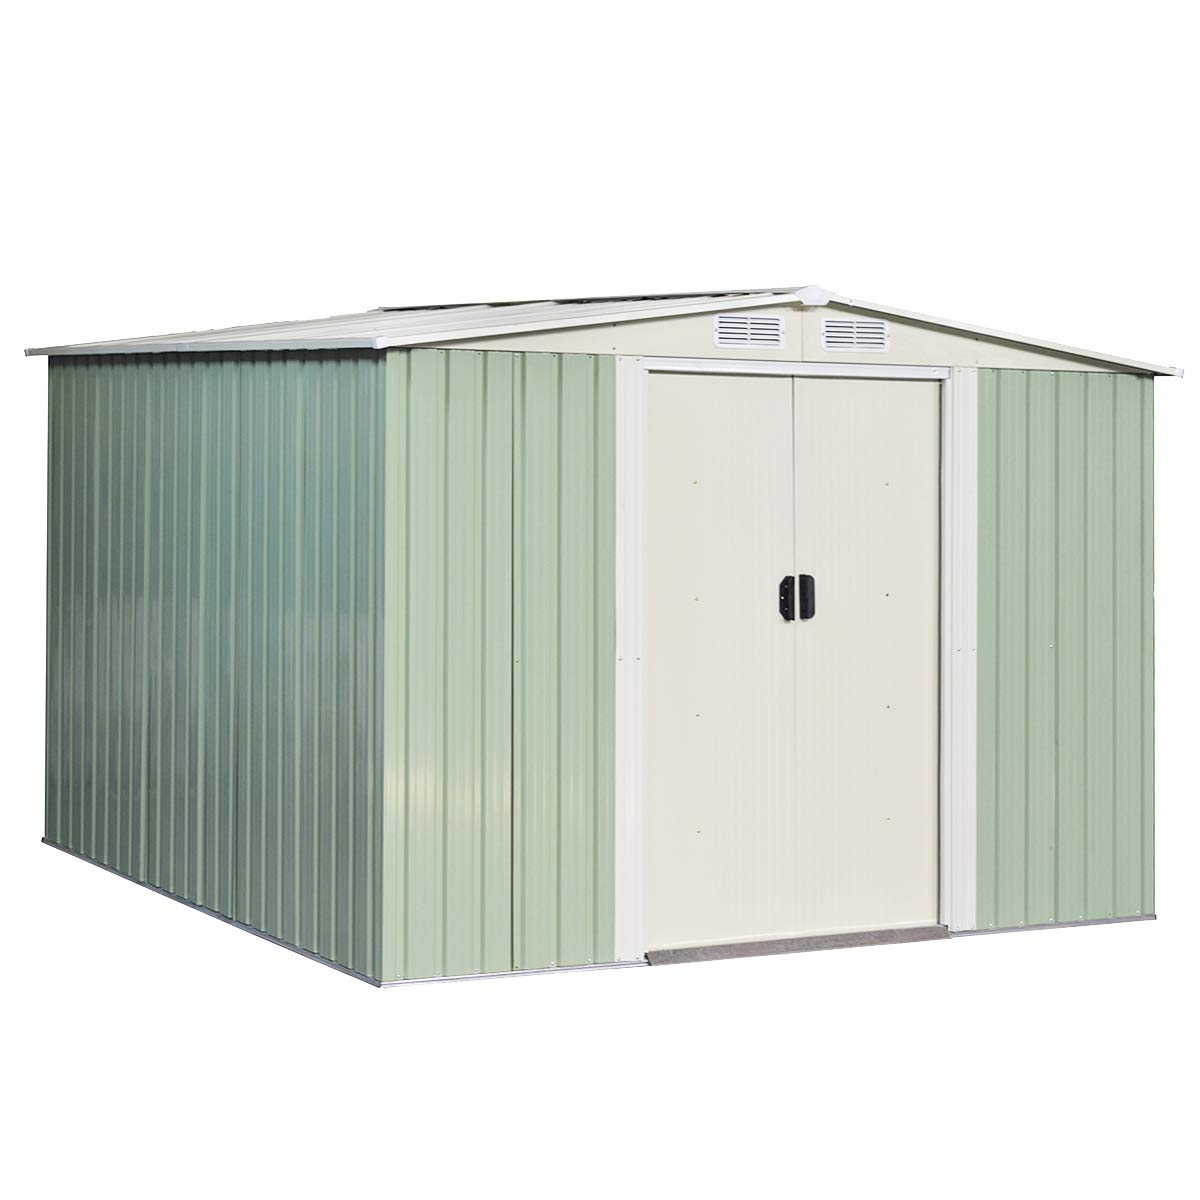 Galvanized Steel Outdoor Storage Shed 8.5X 8.5Ft Heavy Duty Tool House - GoplusUS